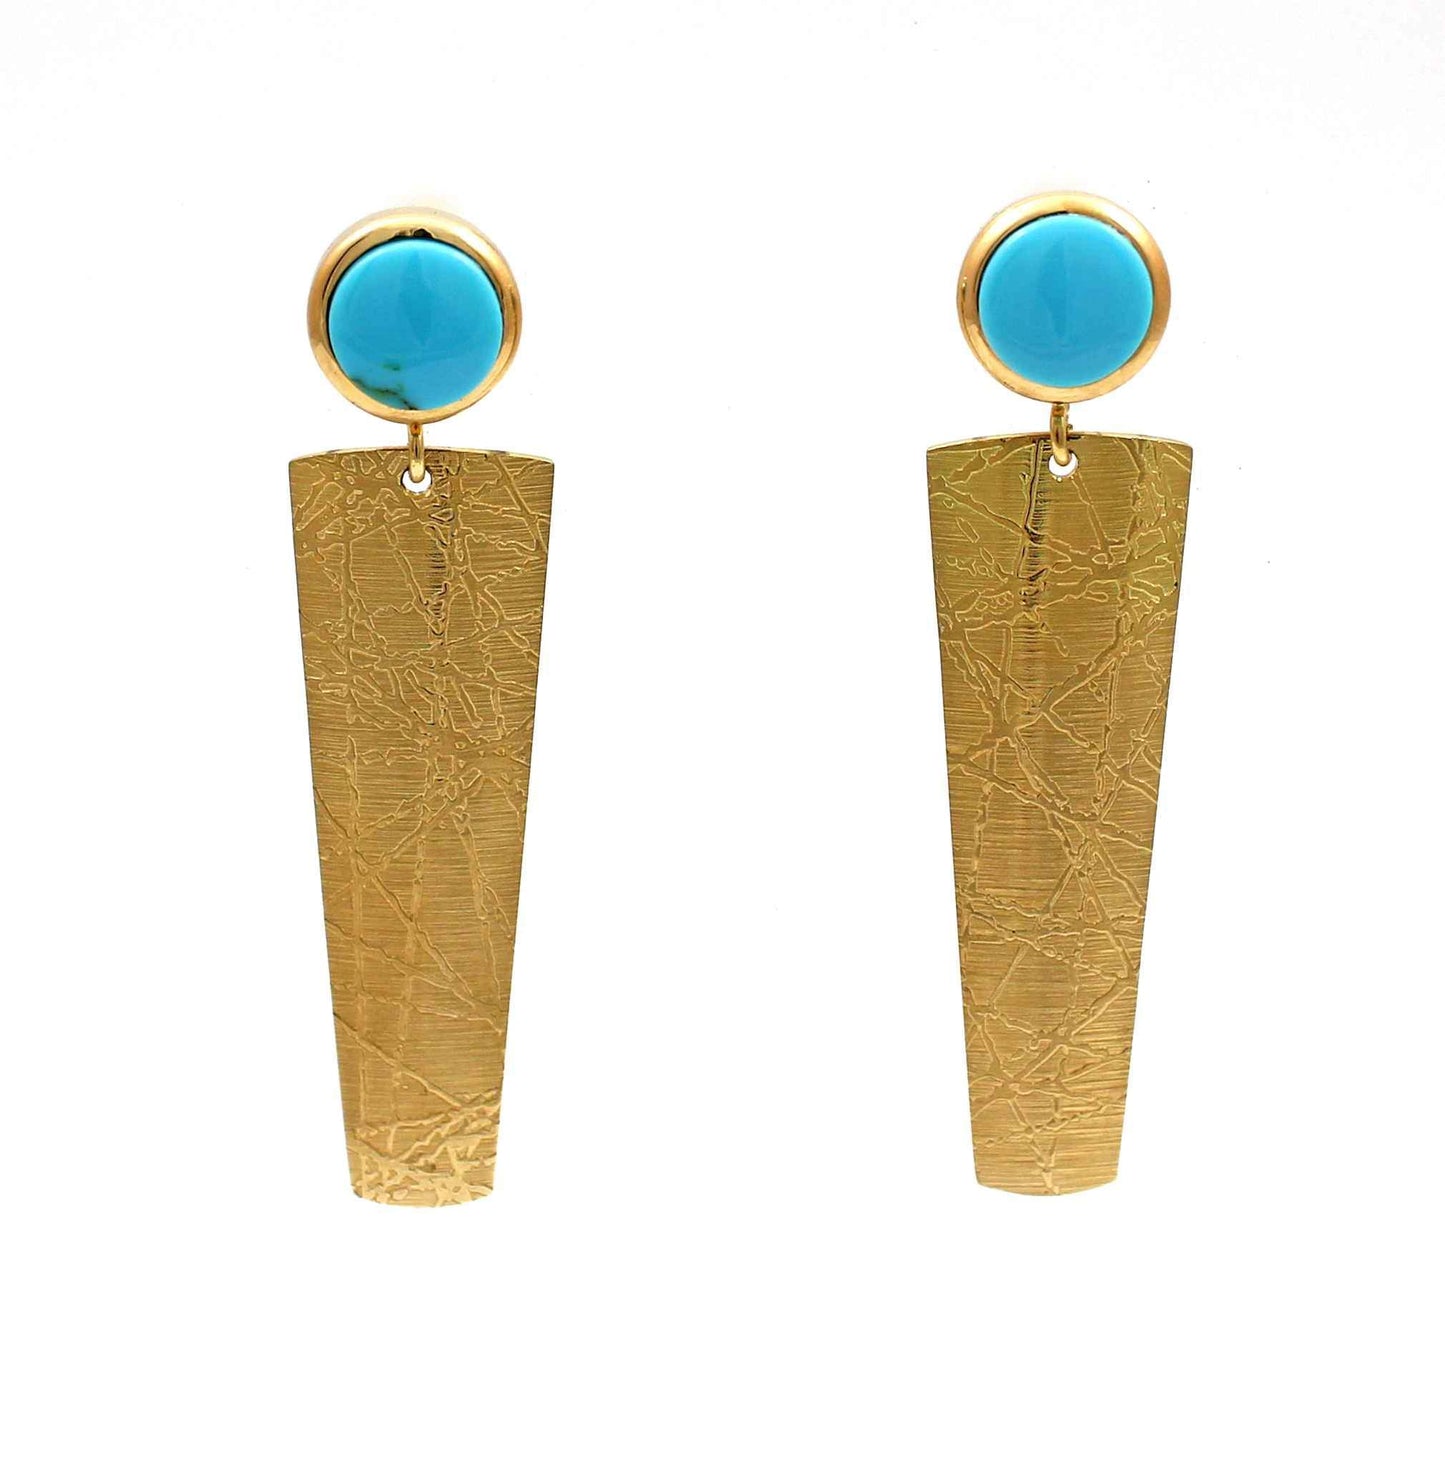 18K yellow gold dangle earrings with turquoise by Chris Pruitt